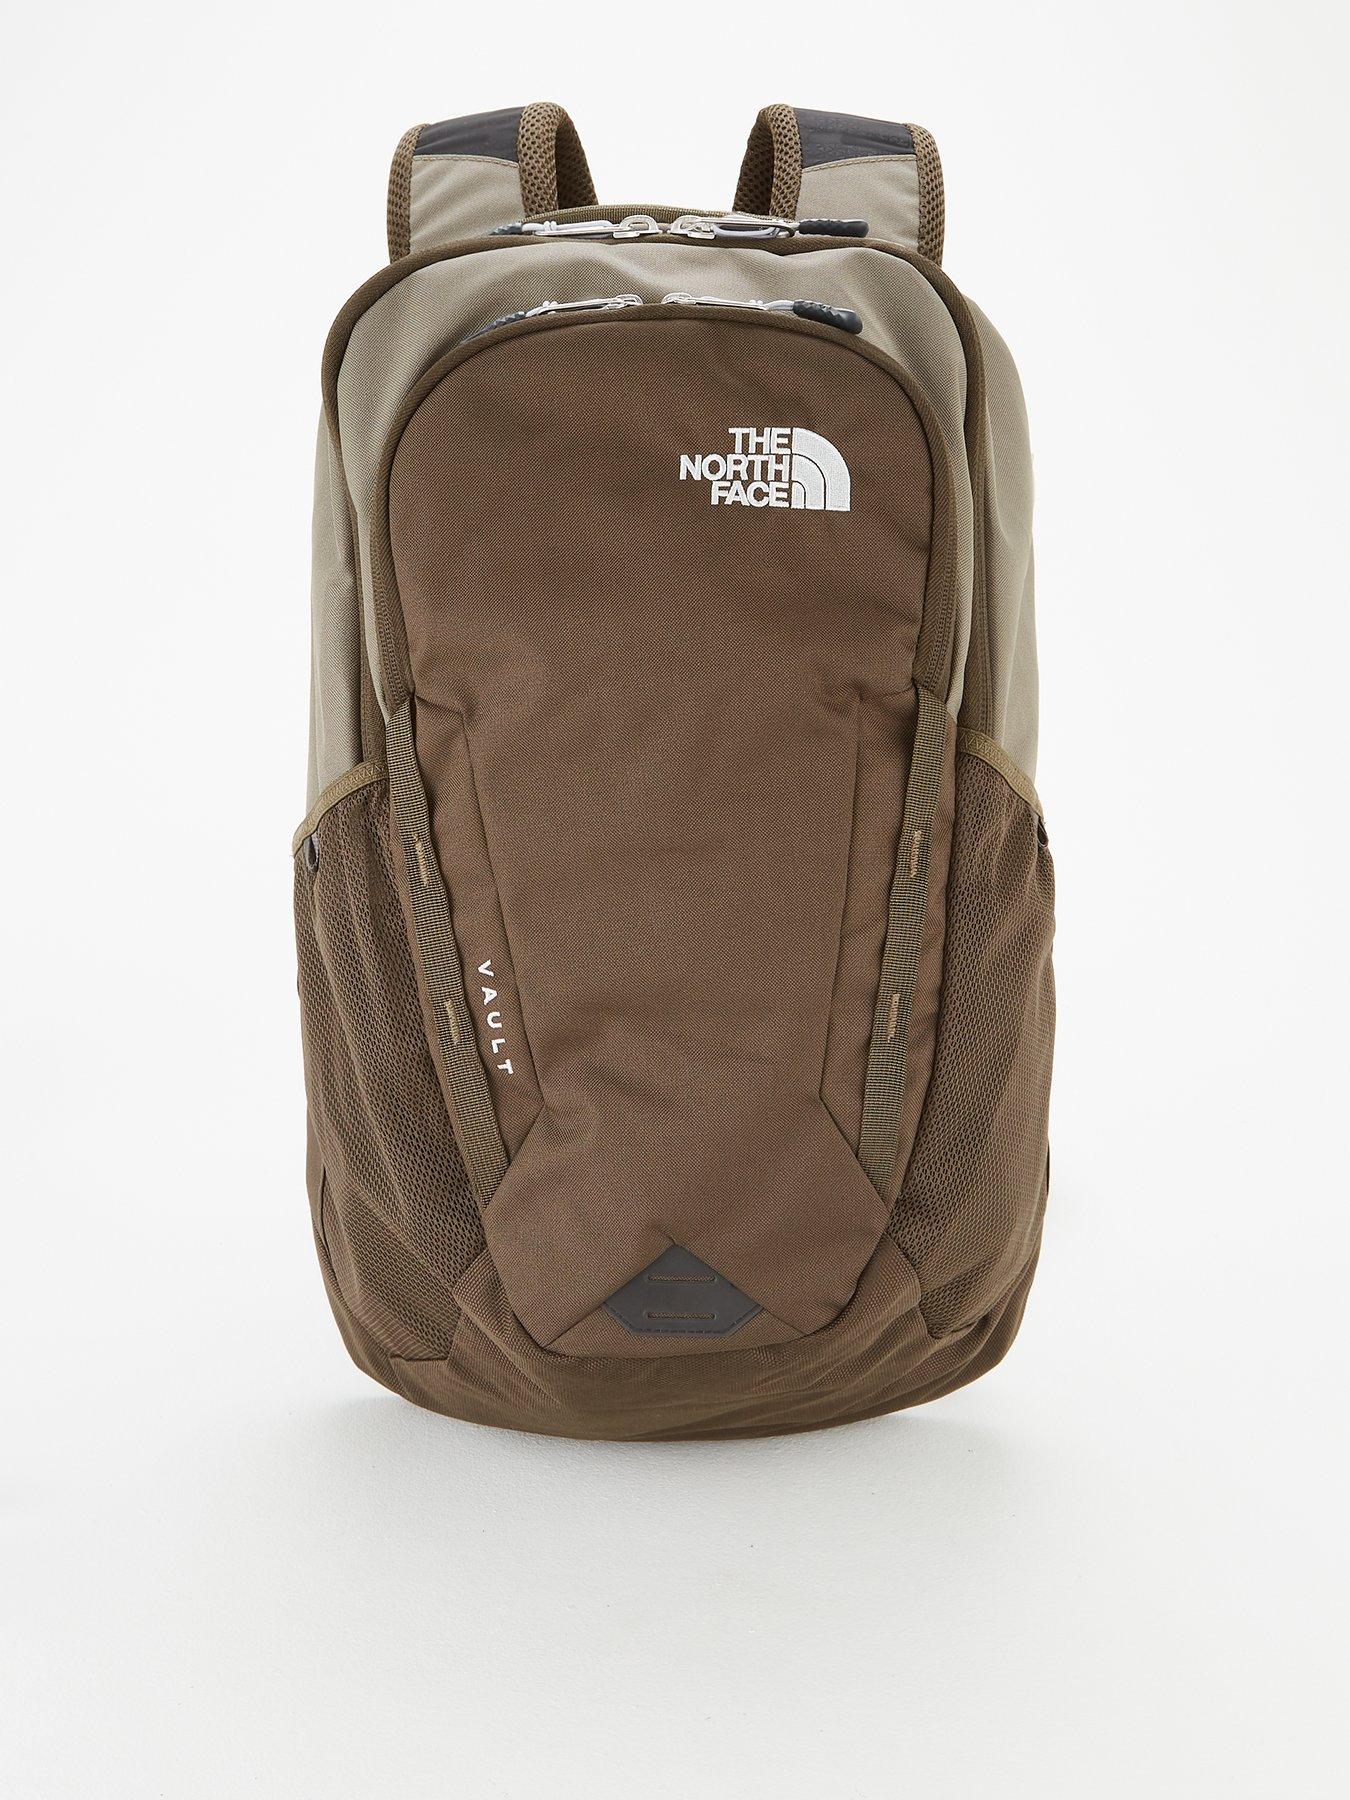 north face backpack brown